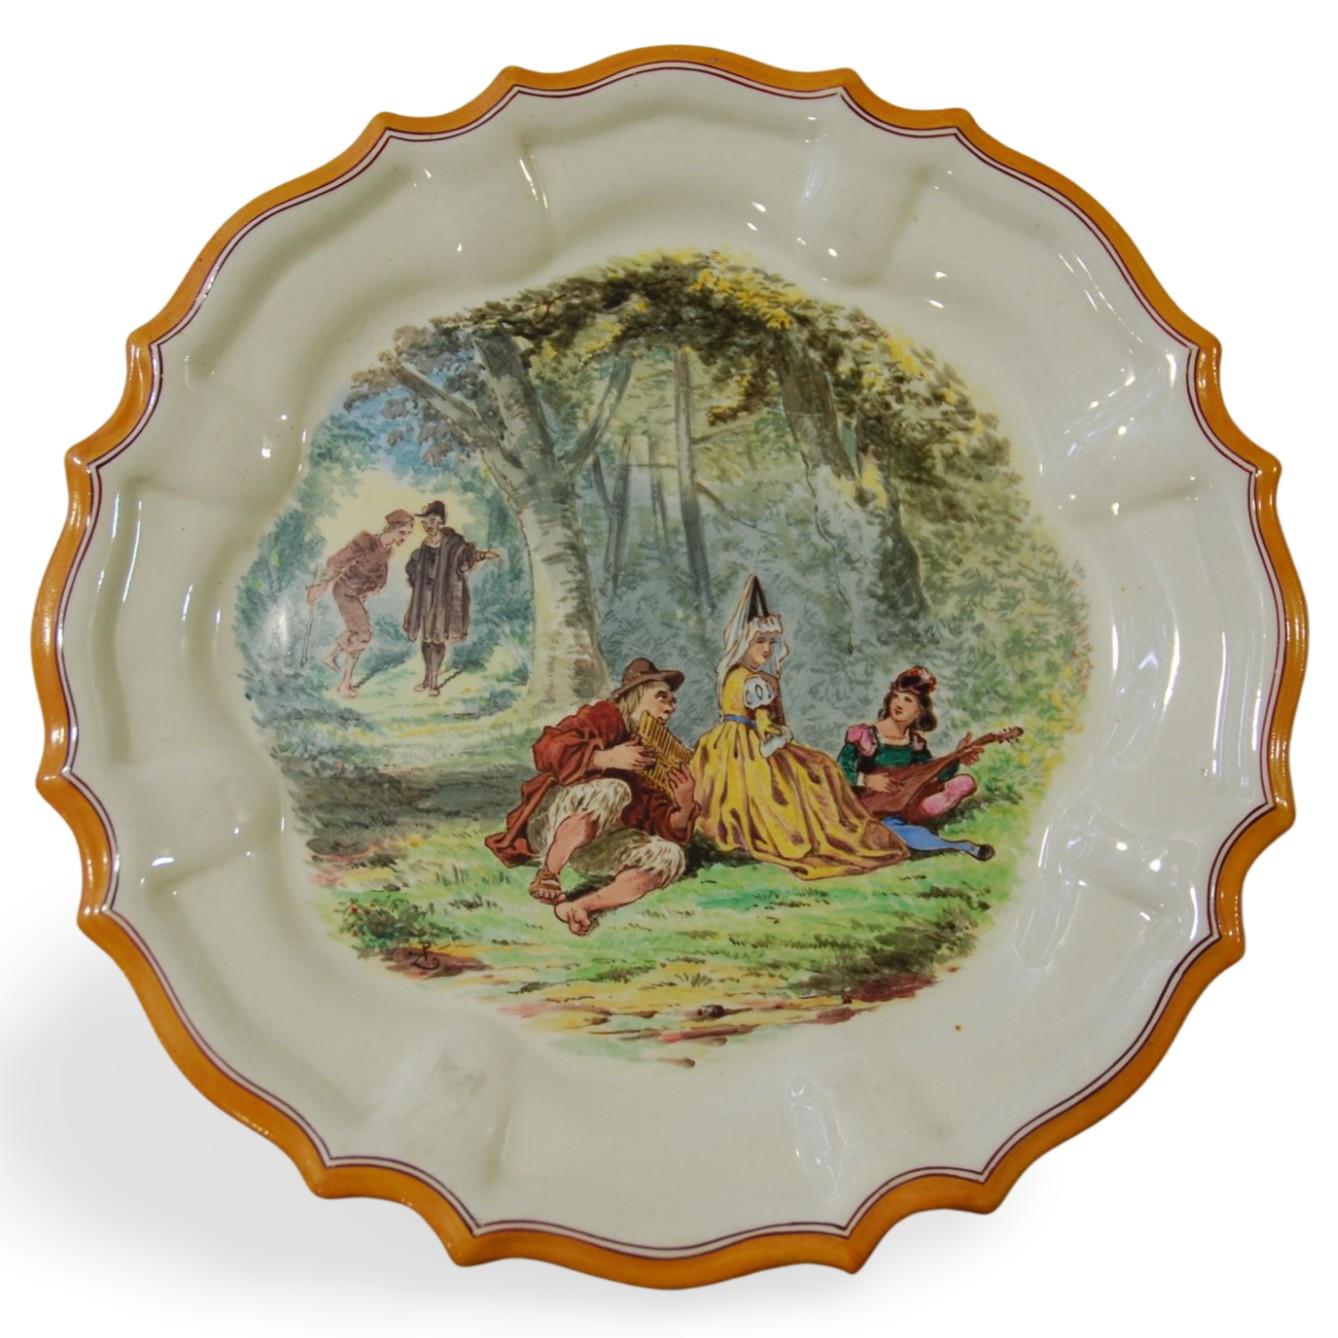 Set of 12 Plates, Aesop Fables, Wedgwood, circa 1860 For Sale 1